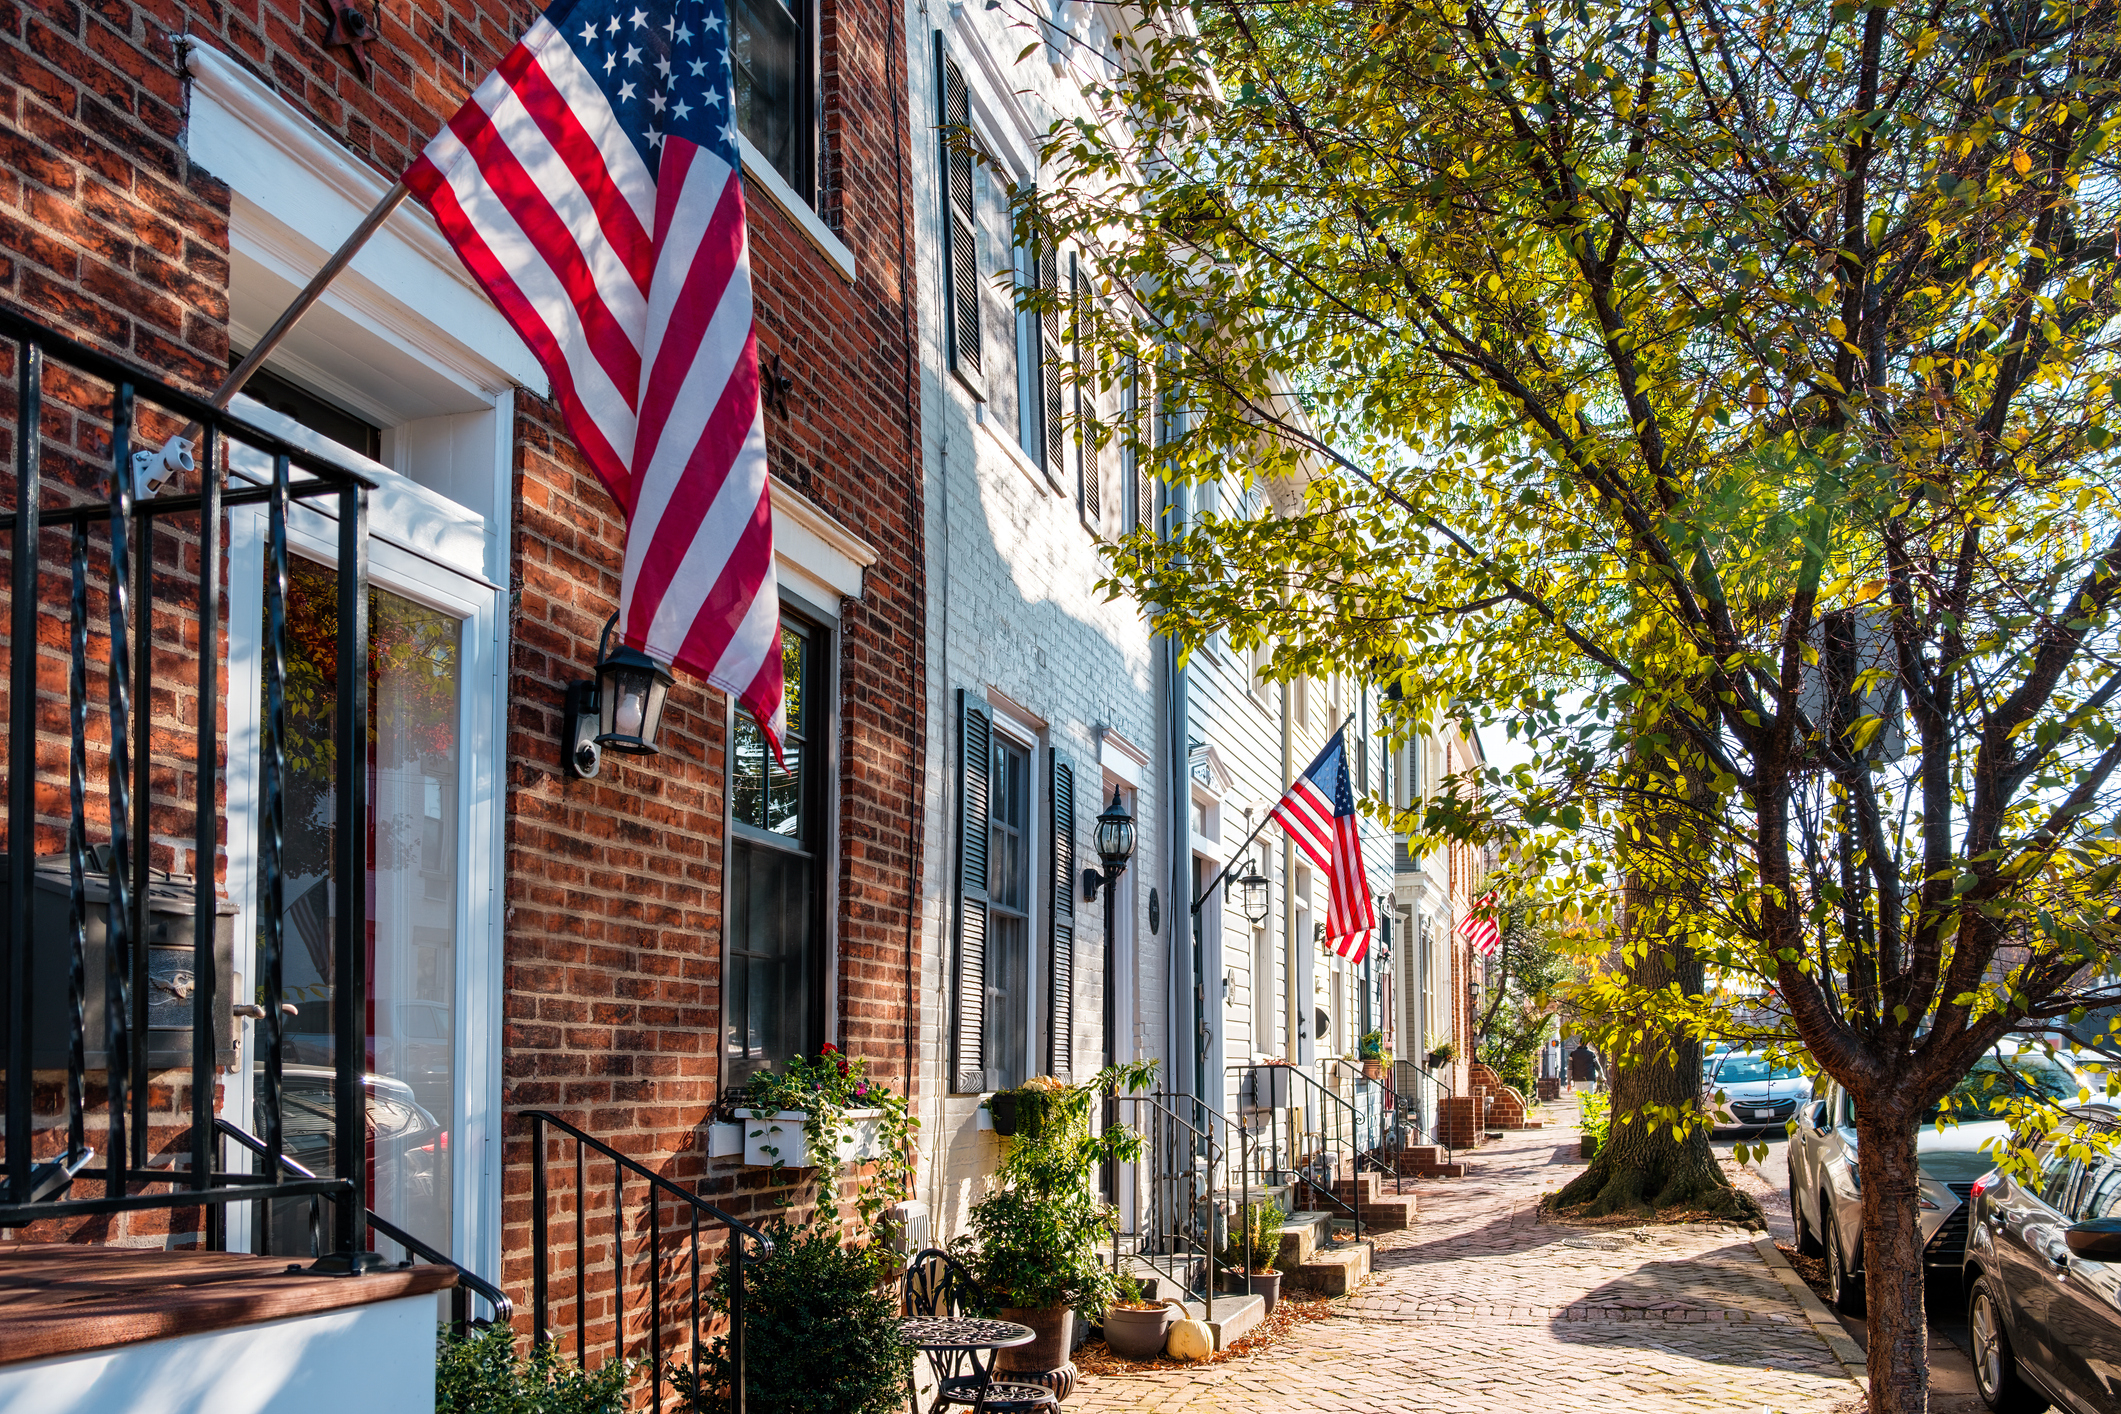 Quaint street with tree-lined sidewalk and brick townhouses displaying American flags